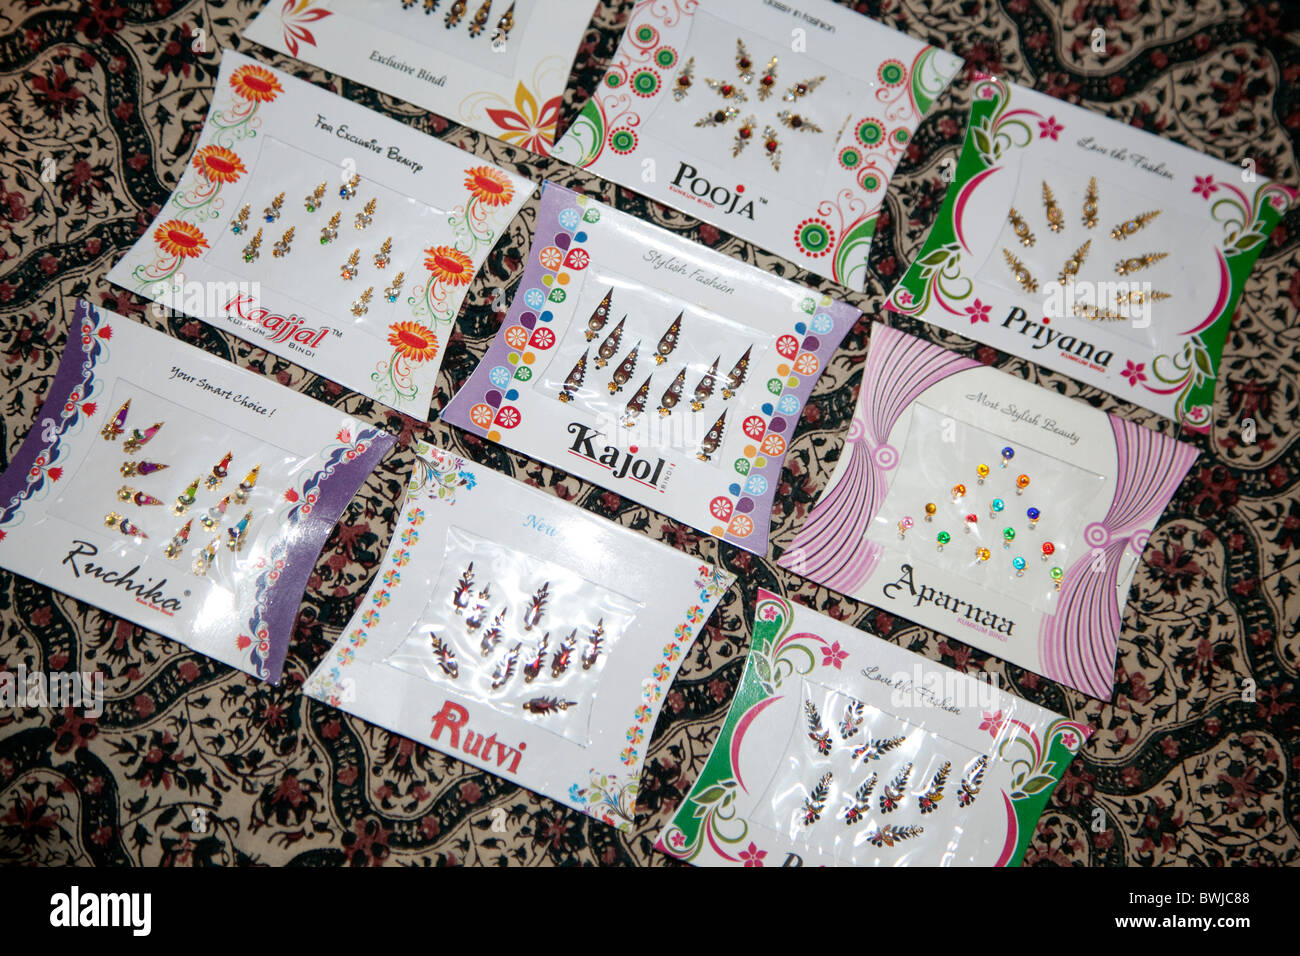 Packets of bindi stickers made in India Stock Photo